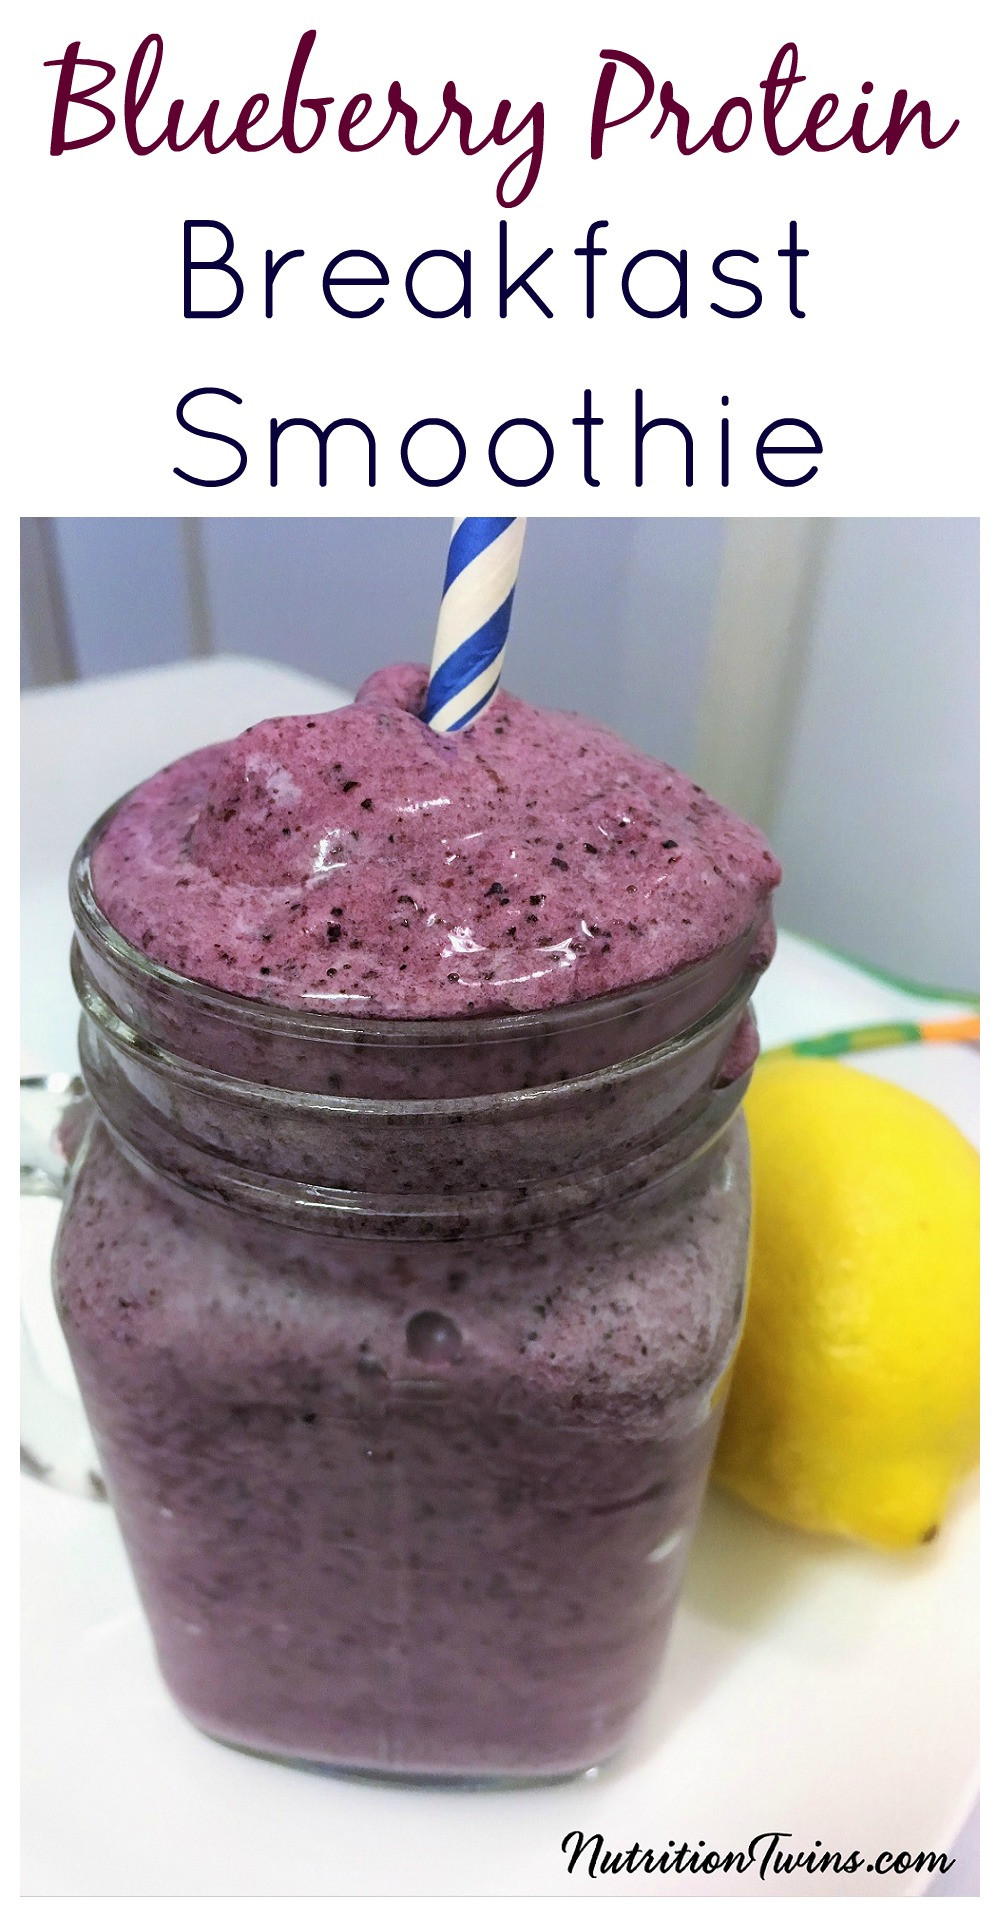 Weight Loss Breakfast Smoothies
 Blueberry Protein Weight Loss Breakfast Smoothie